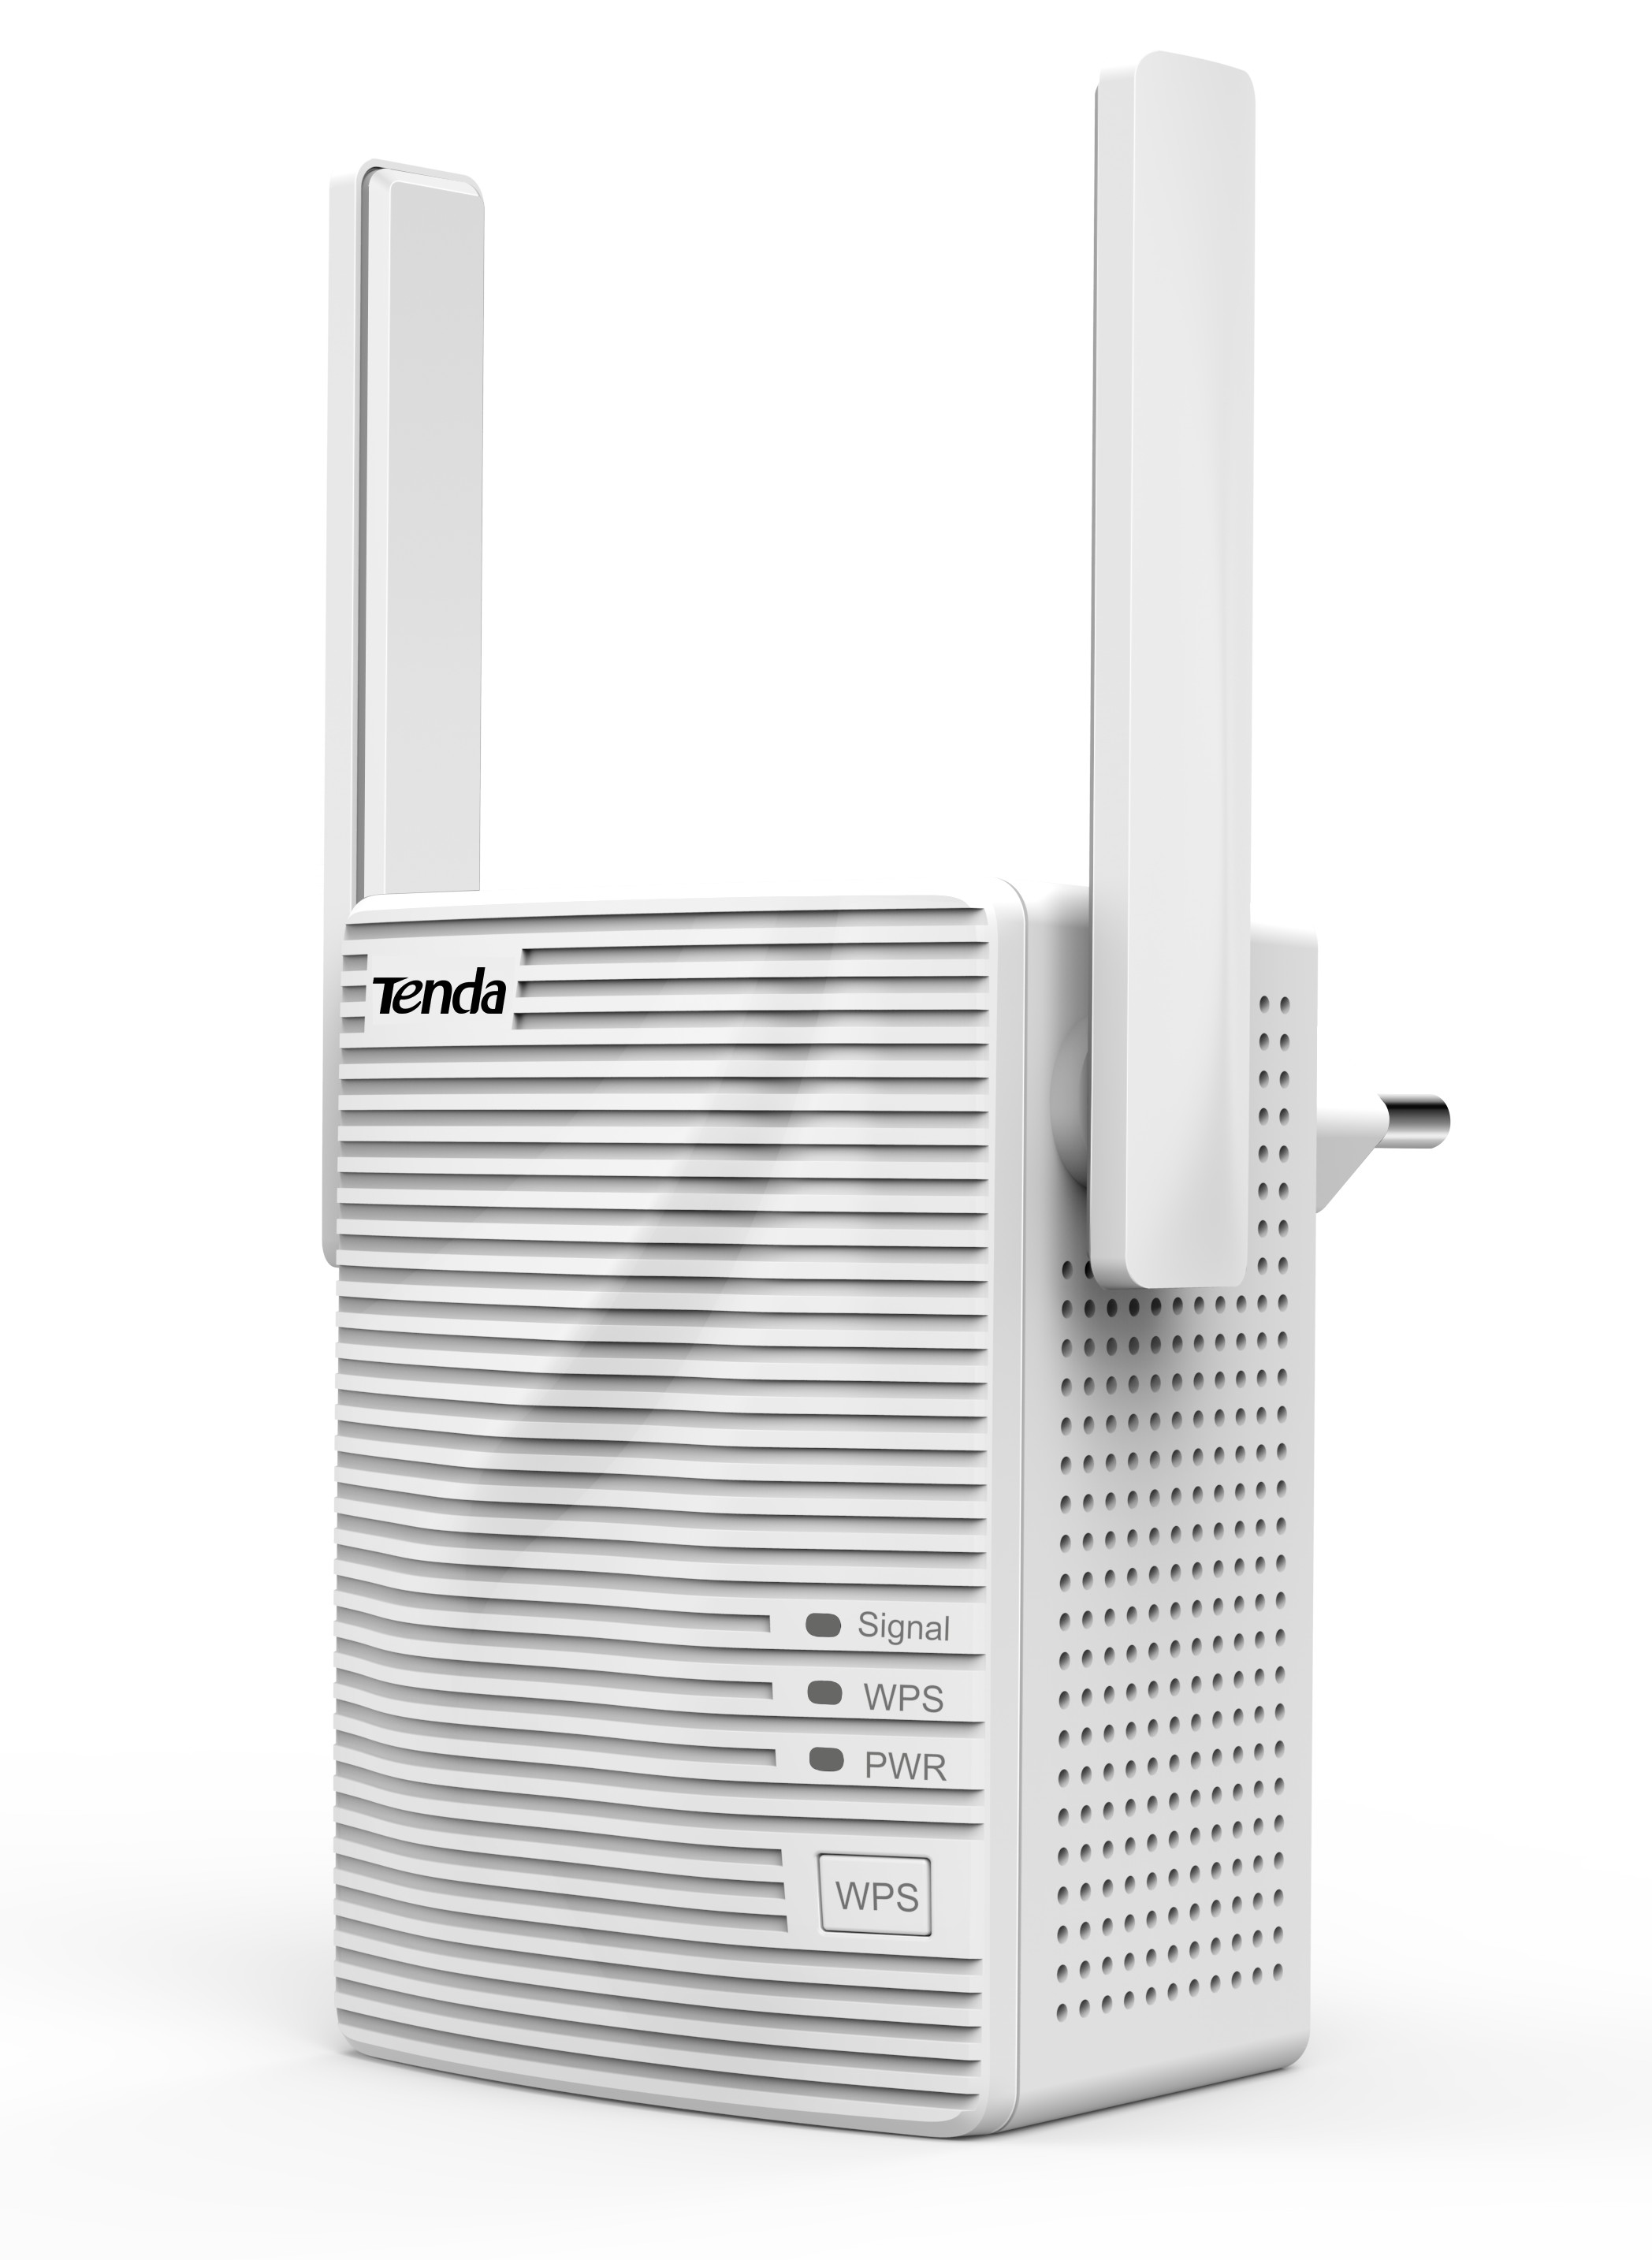 Ripetitore/Extender Wi-Fi Dual-Band A15